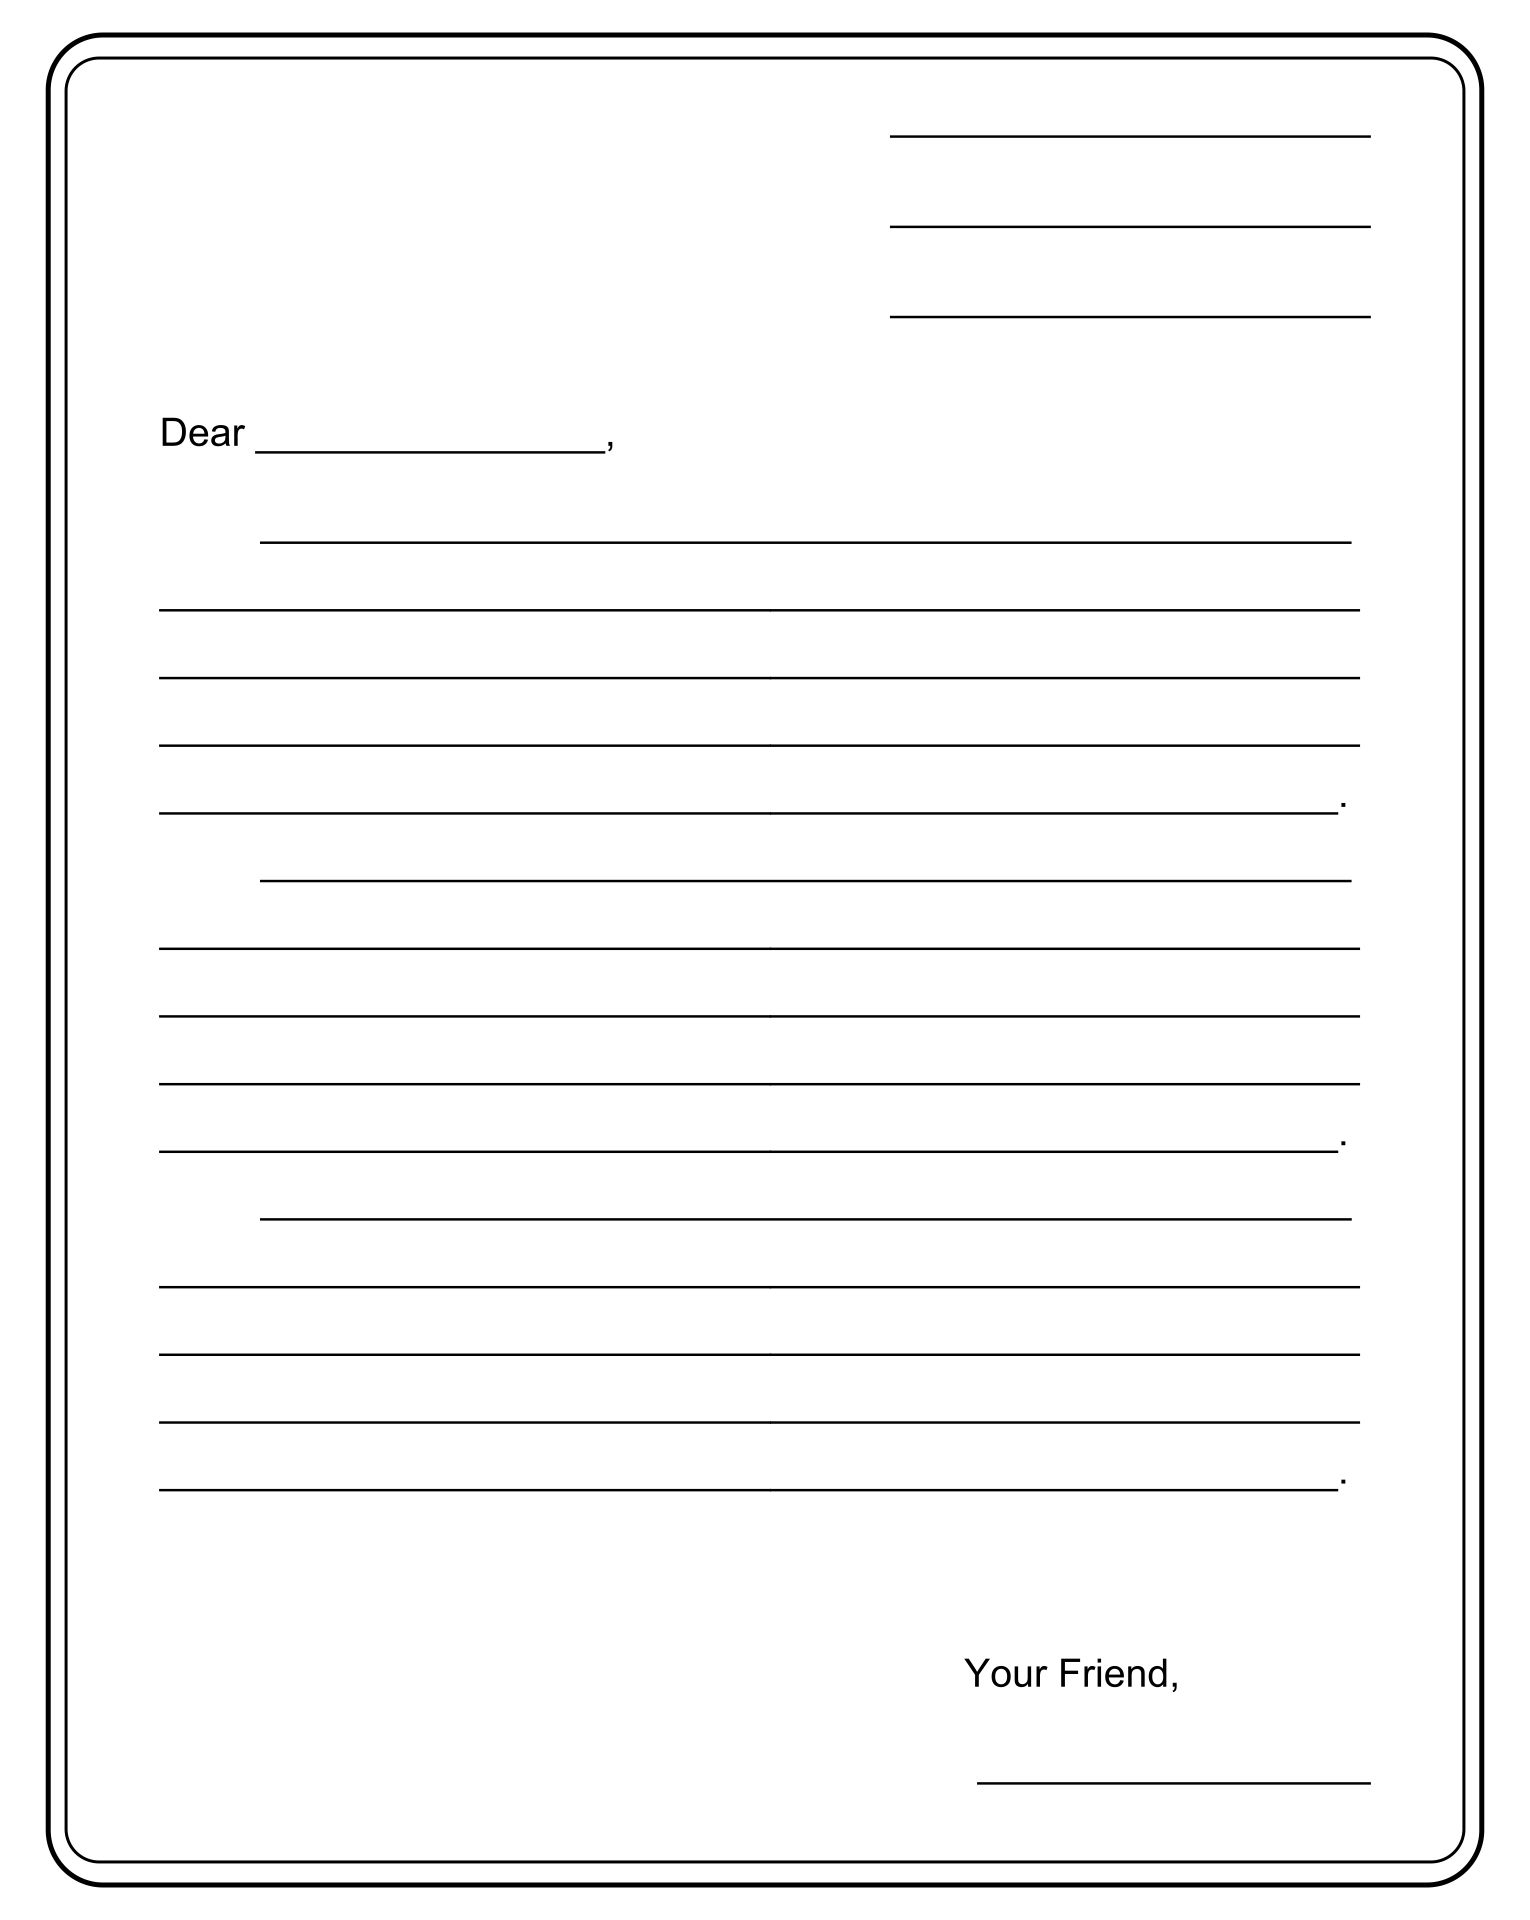 8-best-images-of-printable-blank-letter-template-letter-writing